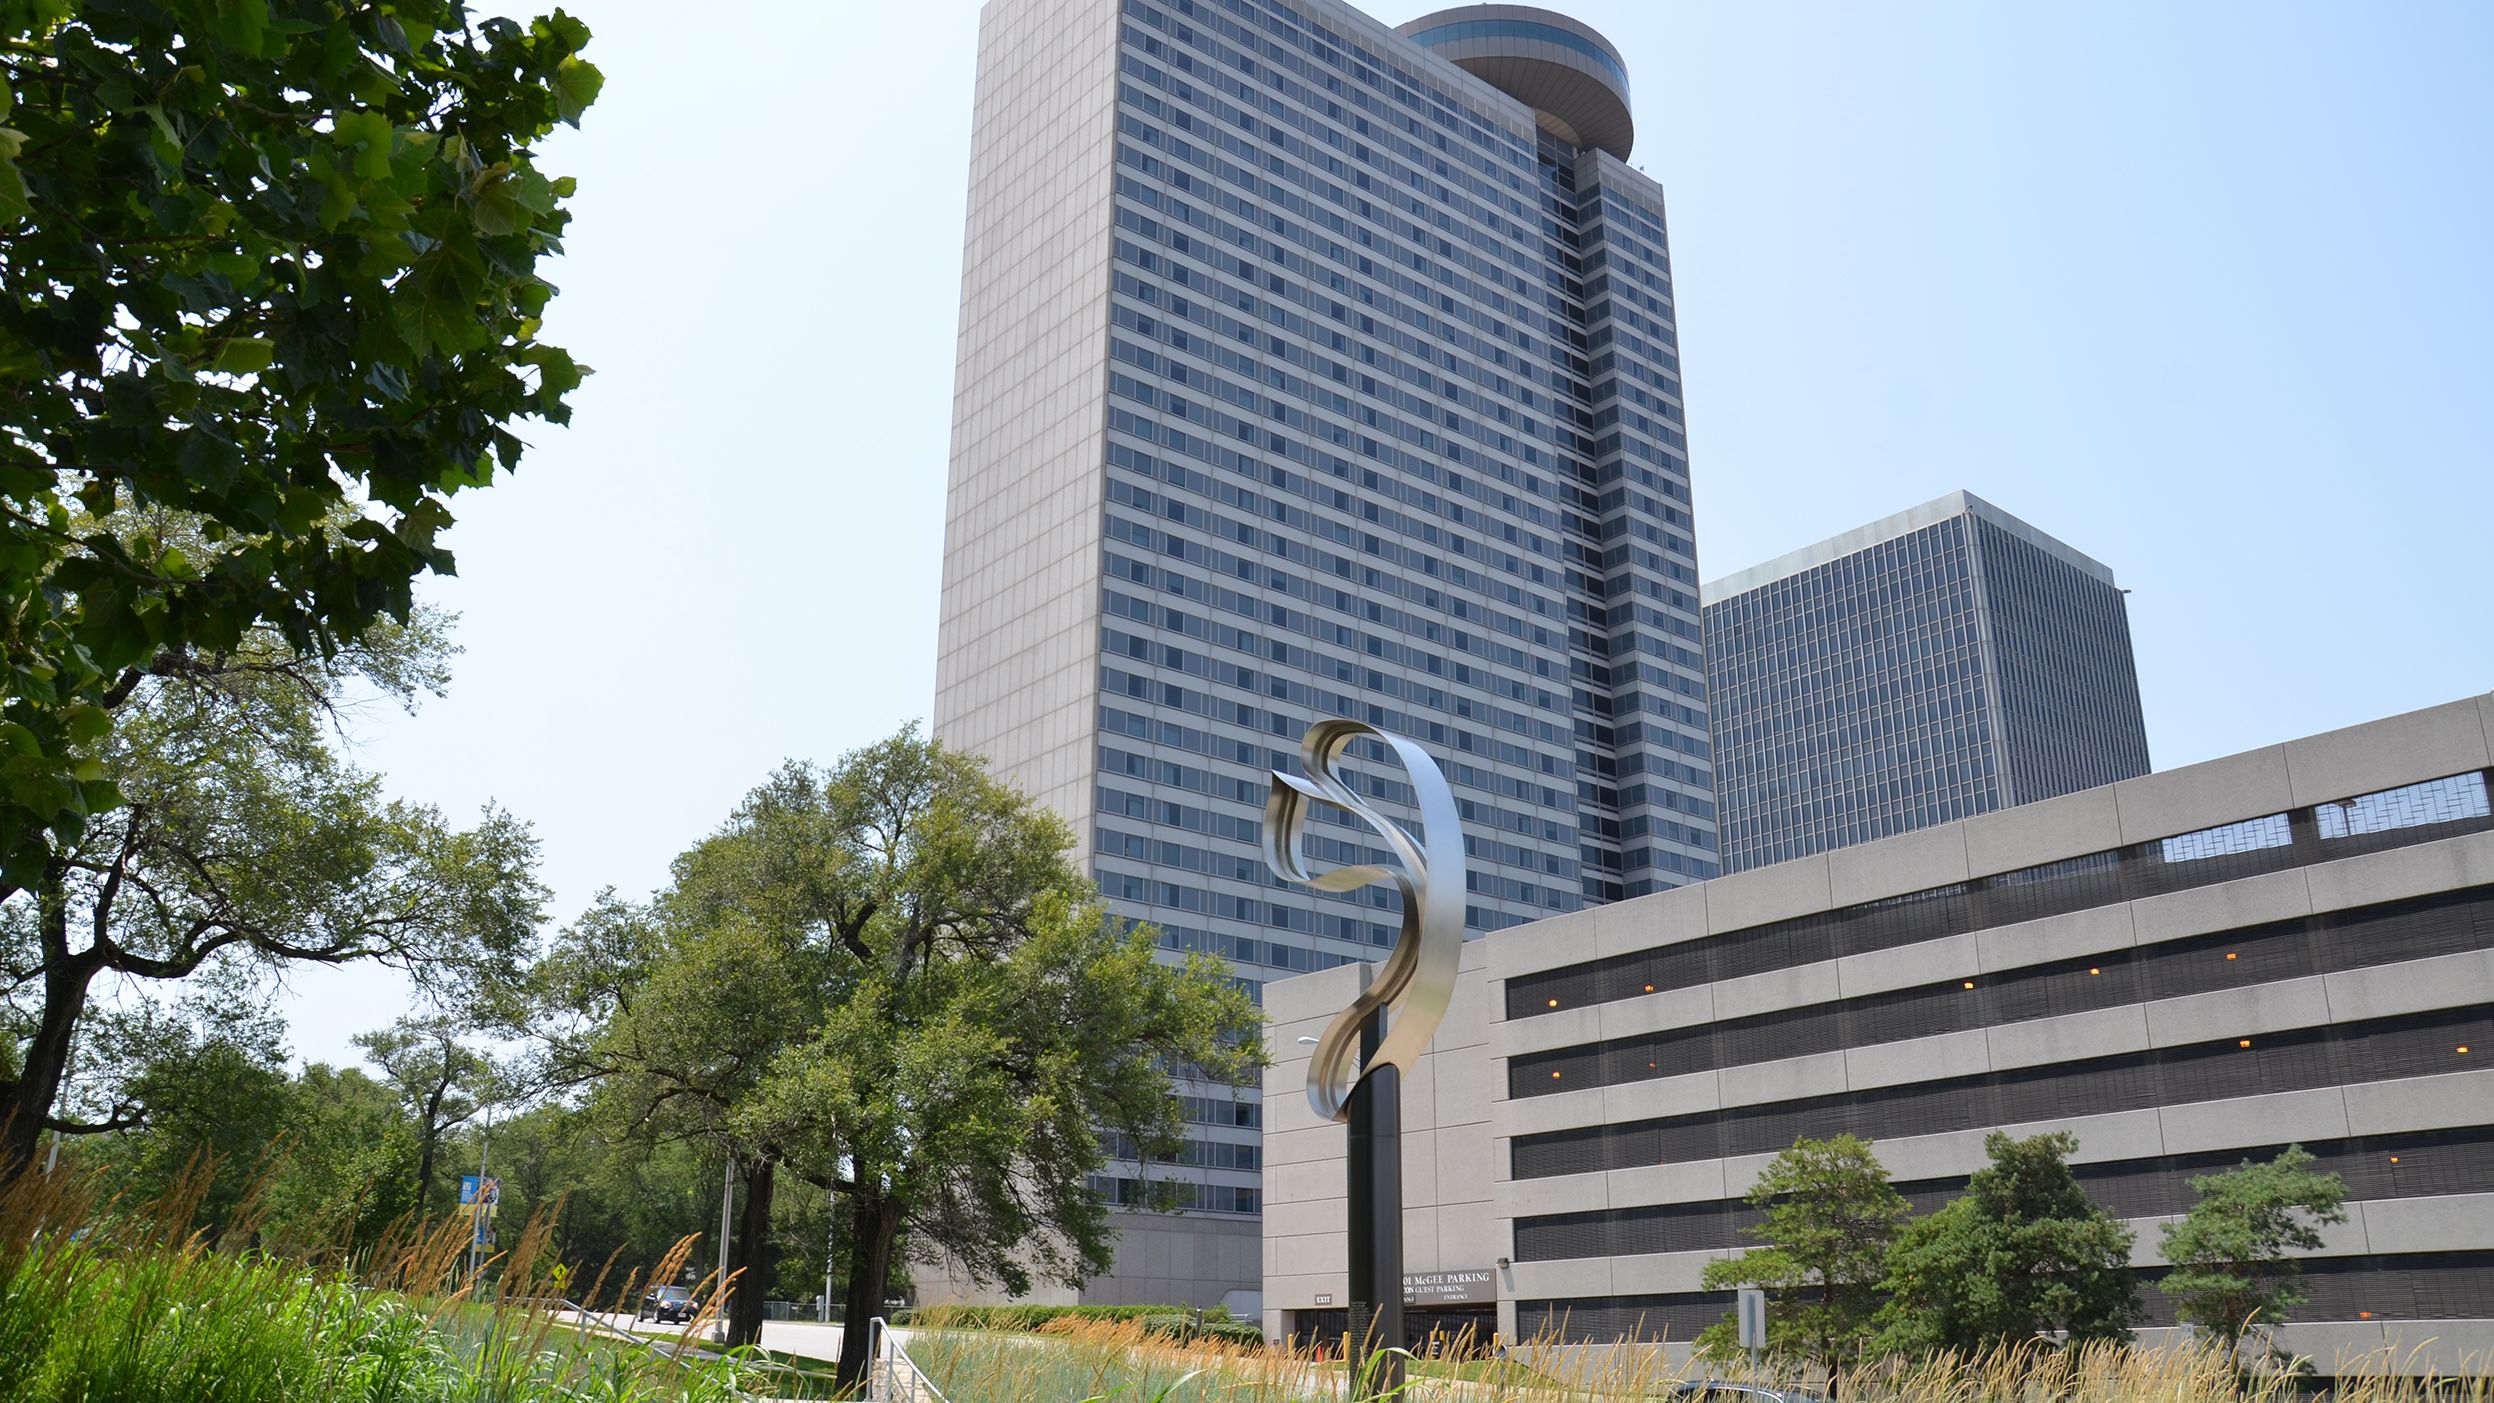 The Skywalk Memorial stands near the former Hyatt Regency building, which is now a Sheraton hotel.